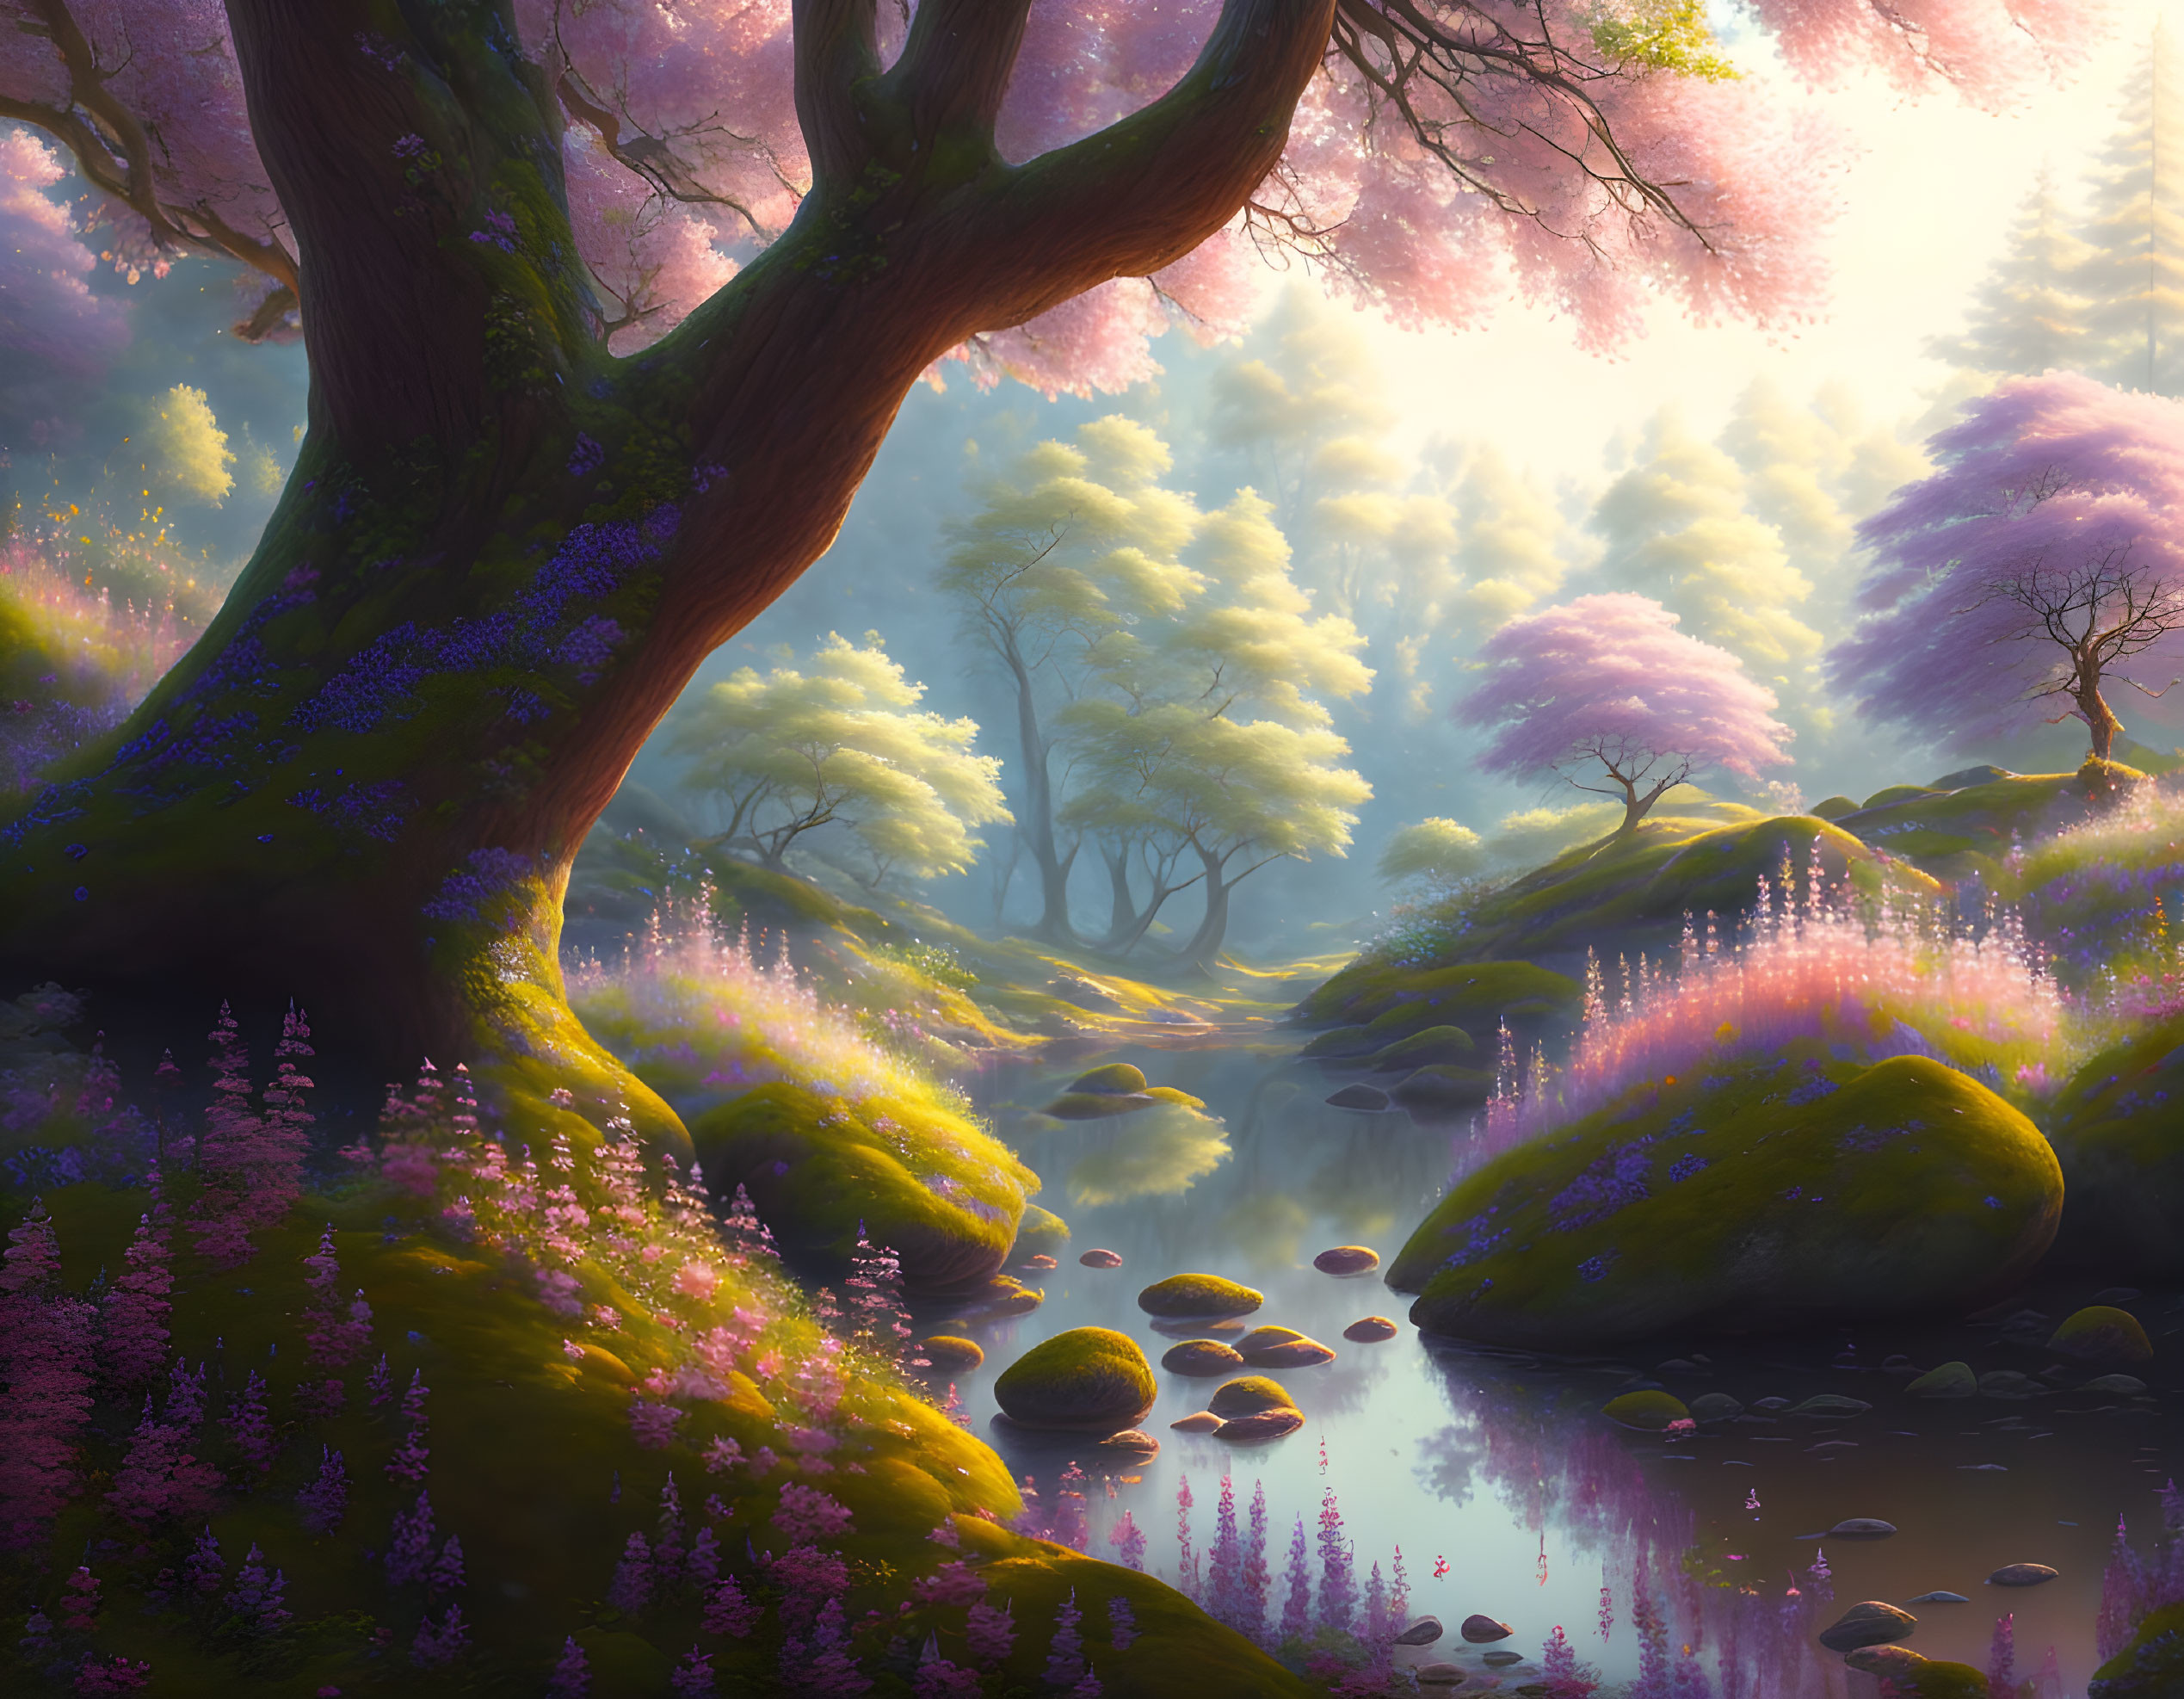 Tranquil forest stream with pink trees, mossy stones, and purple flowers